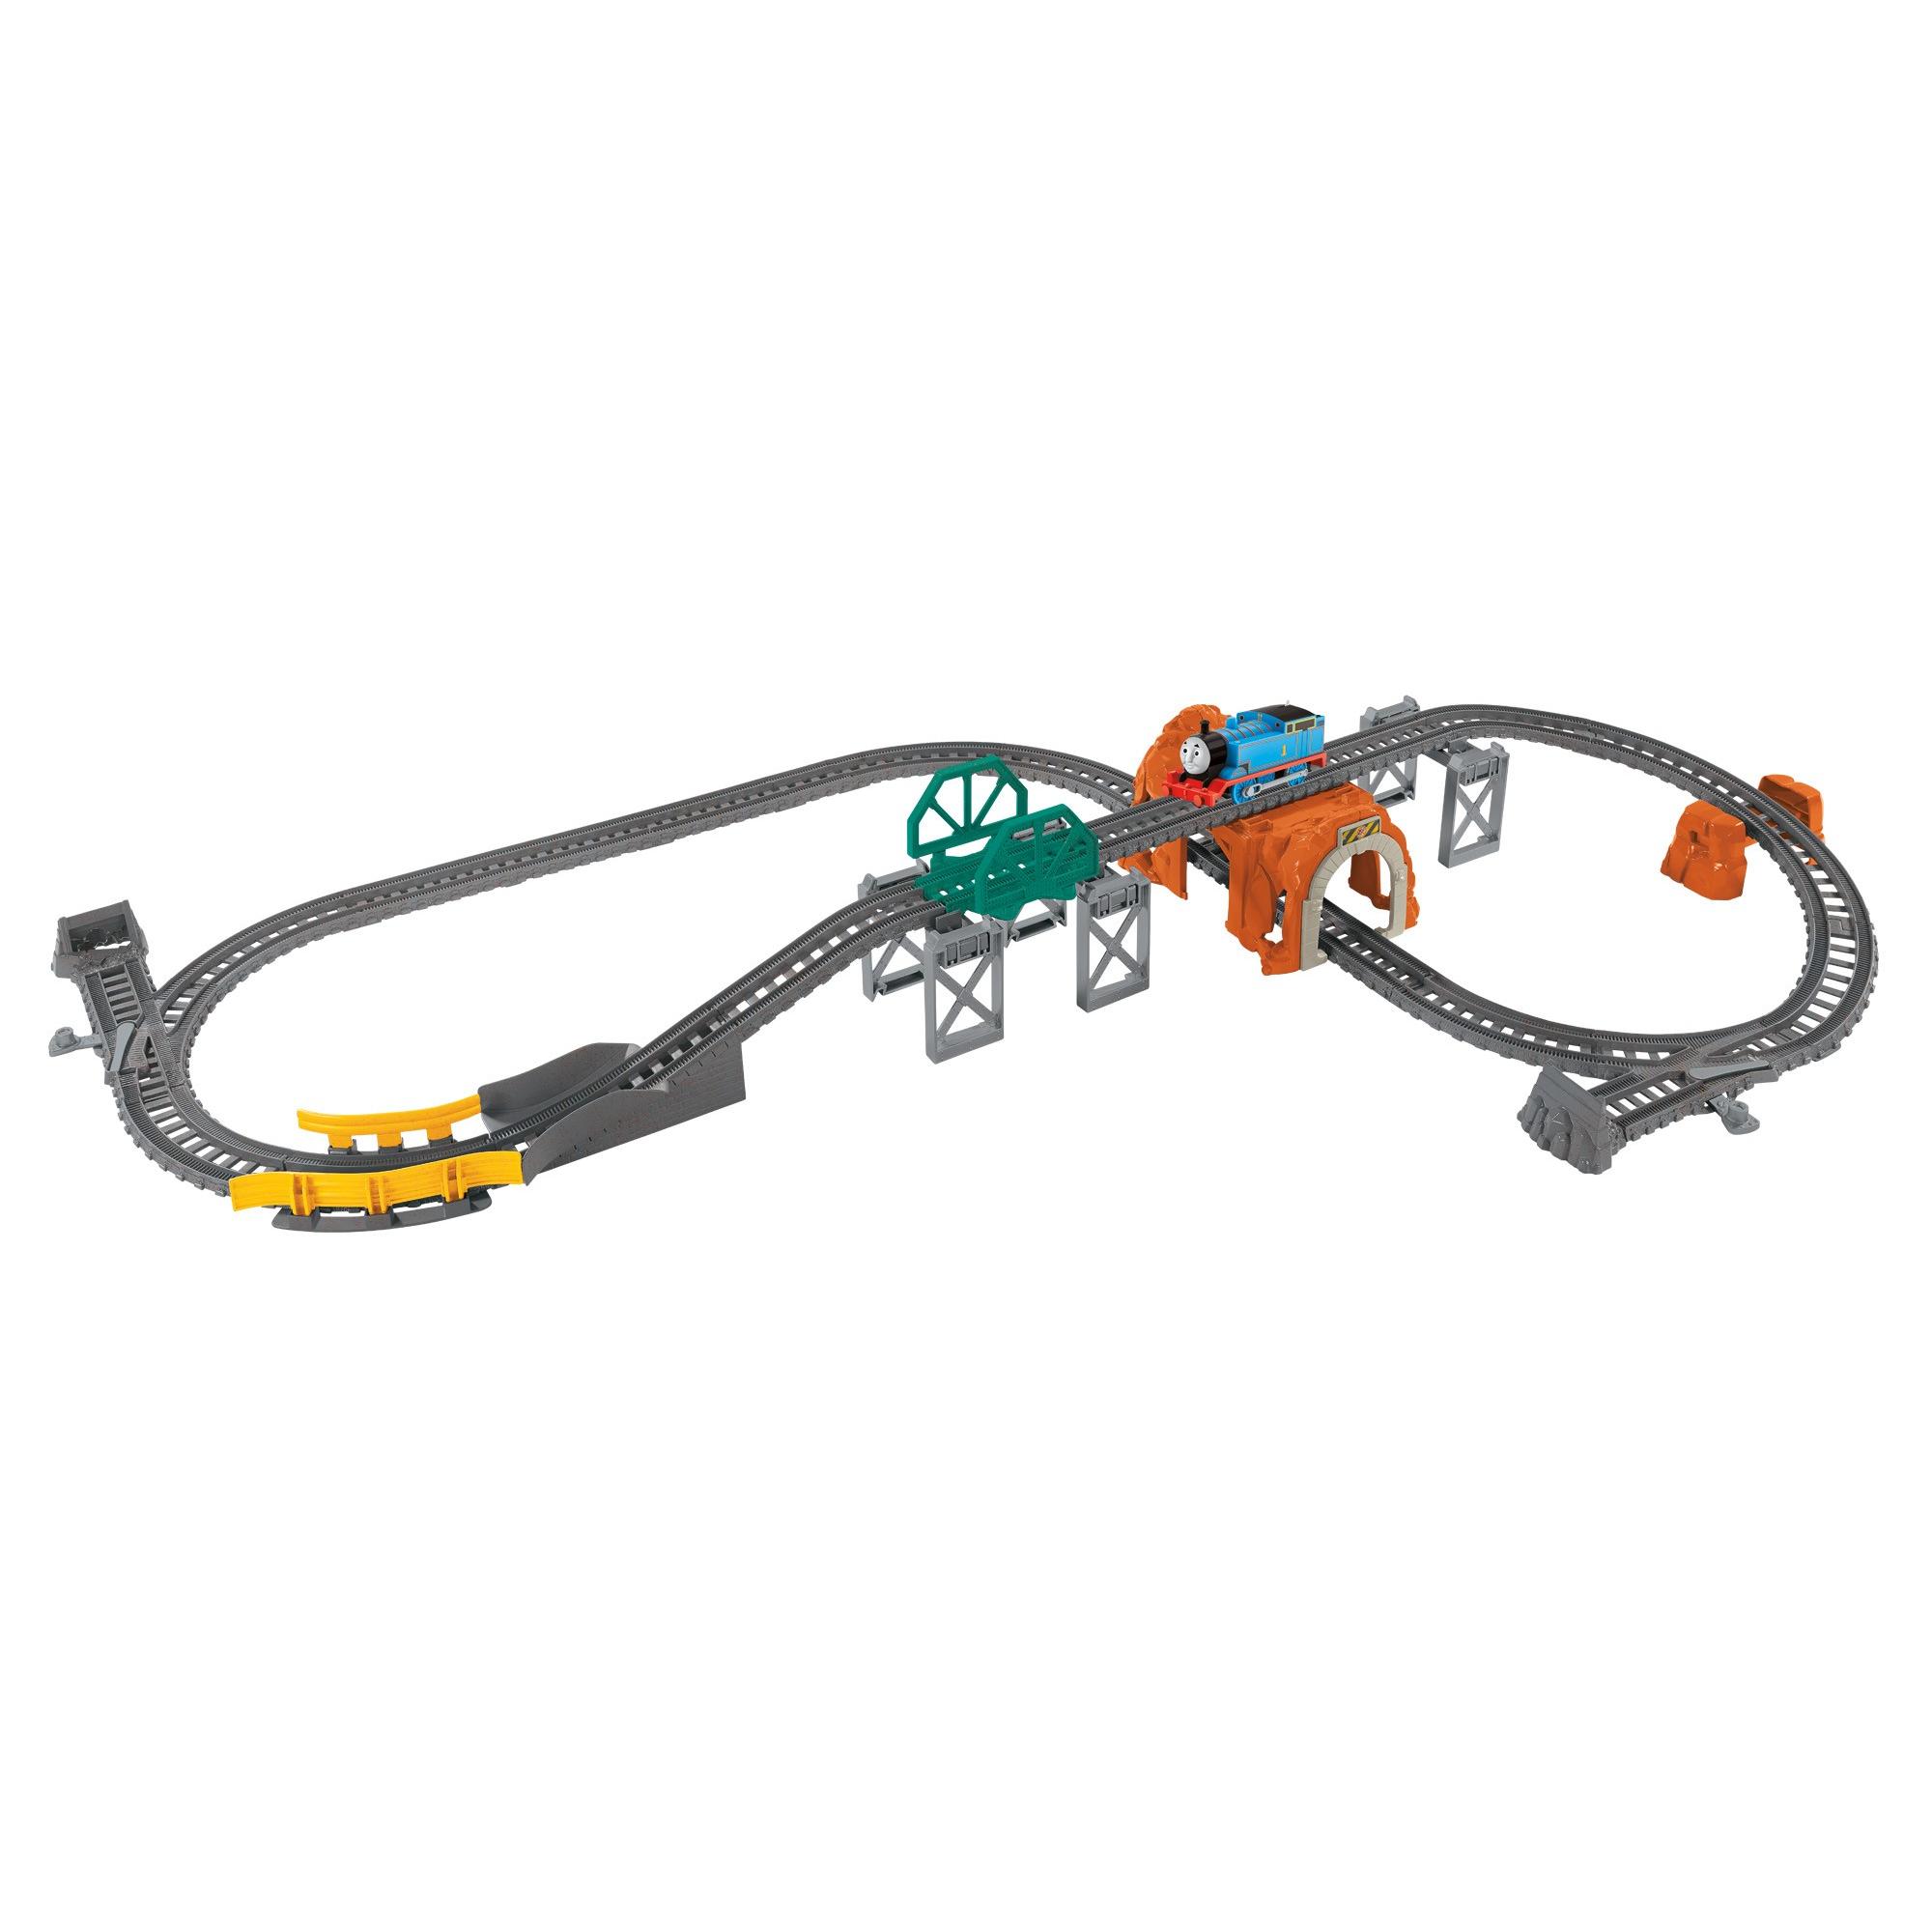 Thomas & Friends TrackMaster 5-in-1 Track Builder Set - image 5 of 7